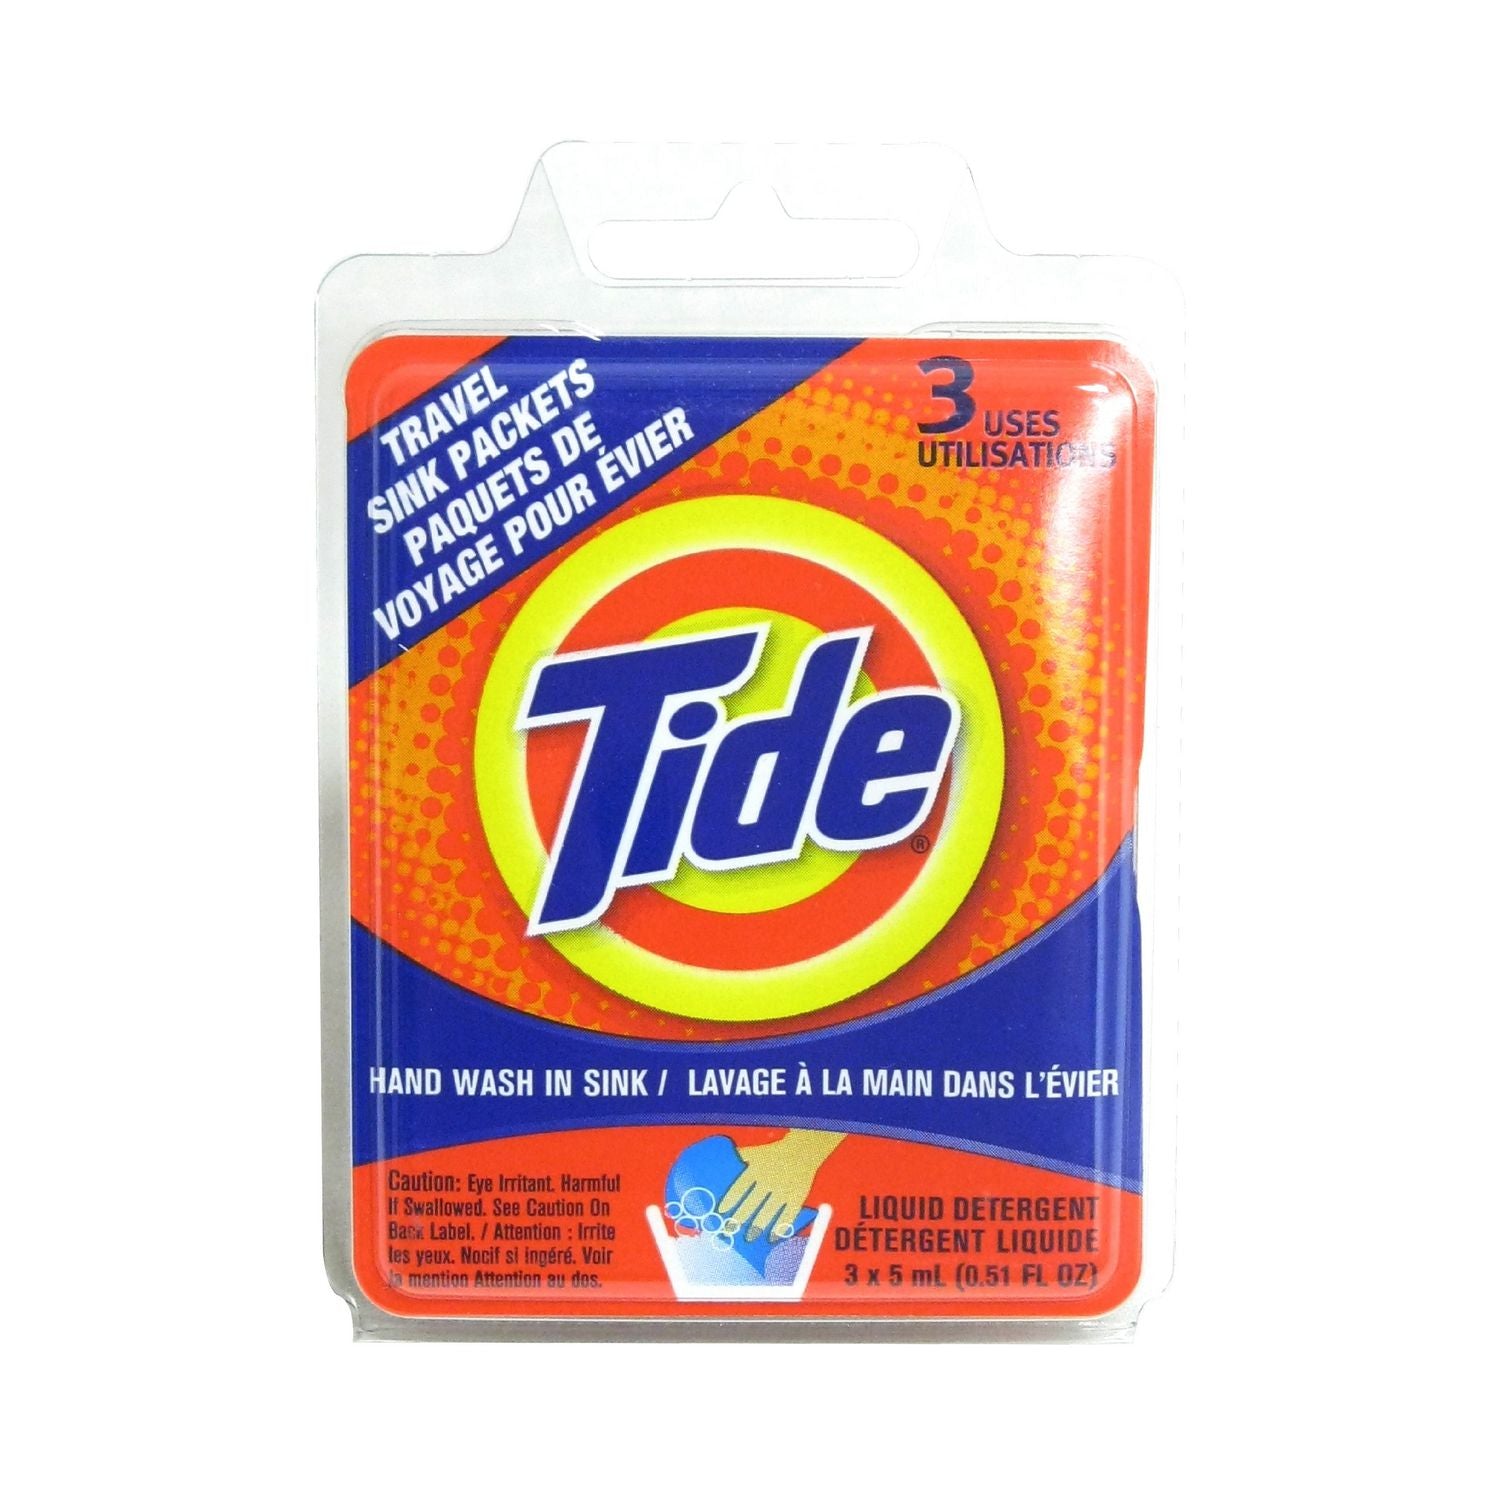 Tide Laundry Detergent, 3 uses - Travel Size, Hand Wash in Sink